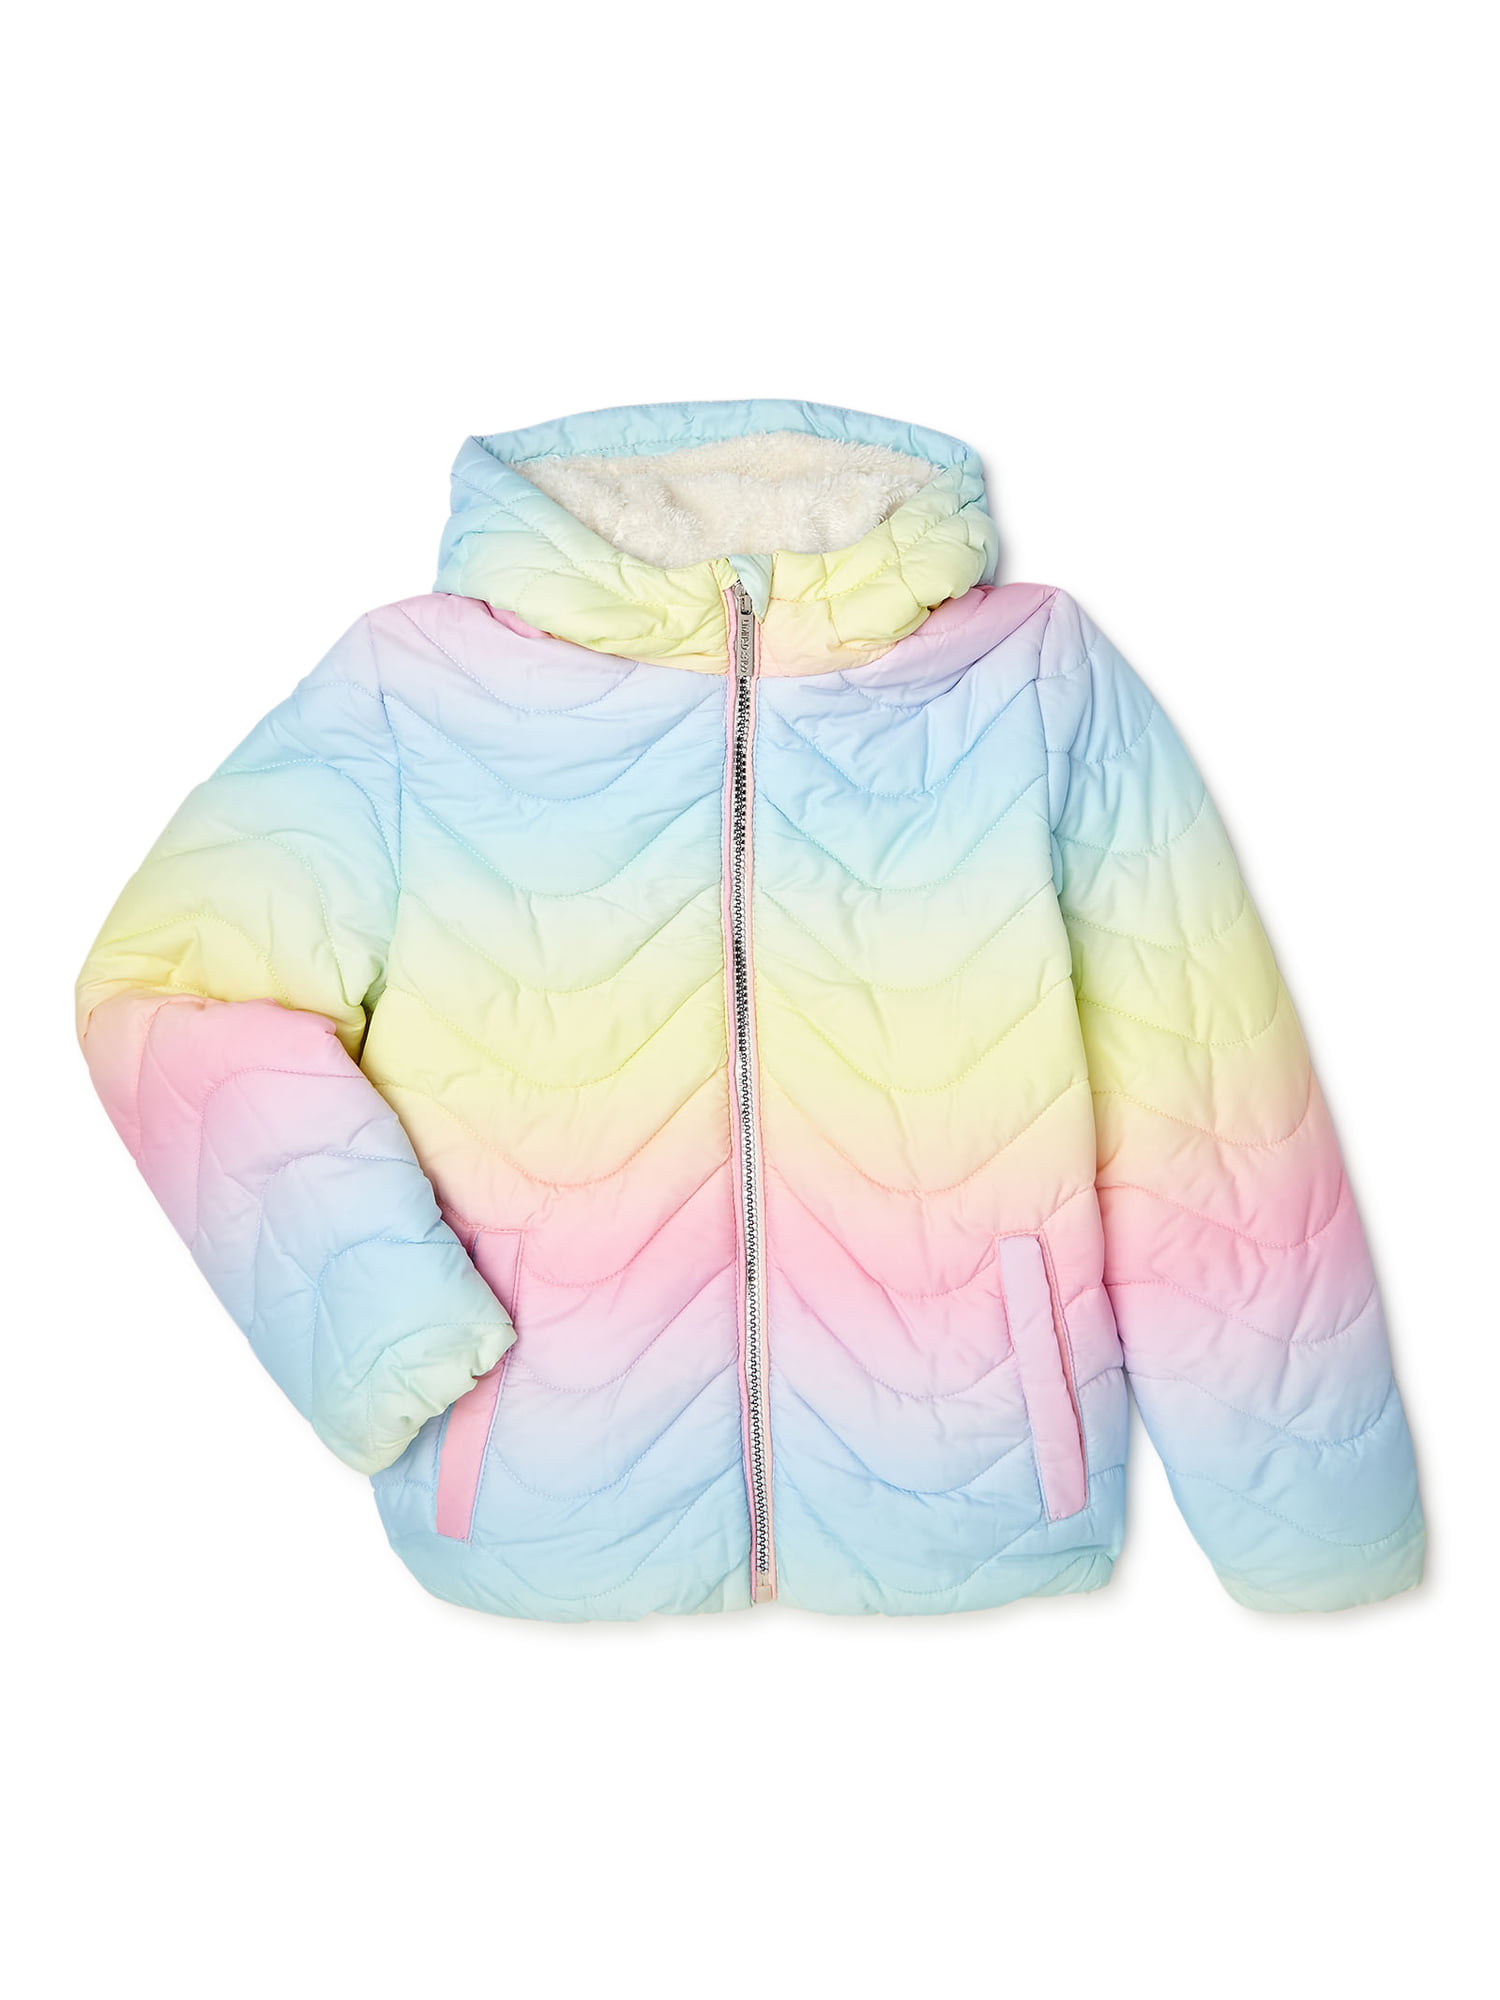 Limited Too Girls Packable Puffer Jacket with Faux Fur Lining, Sizes 4 ...